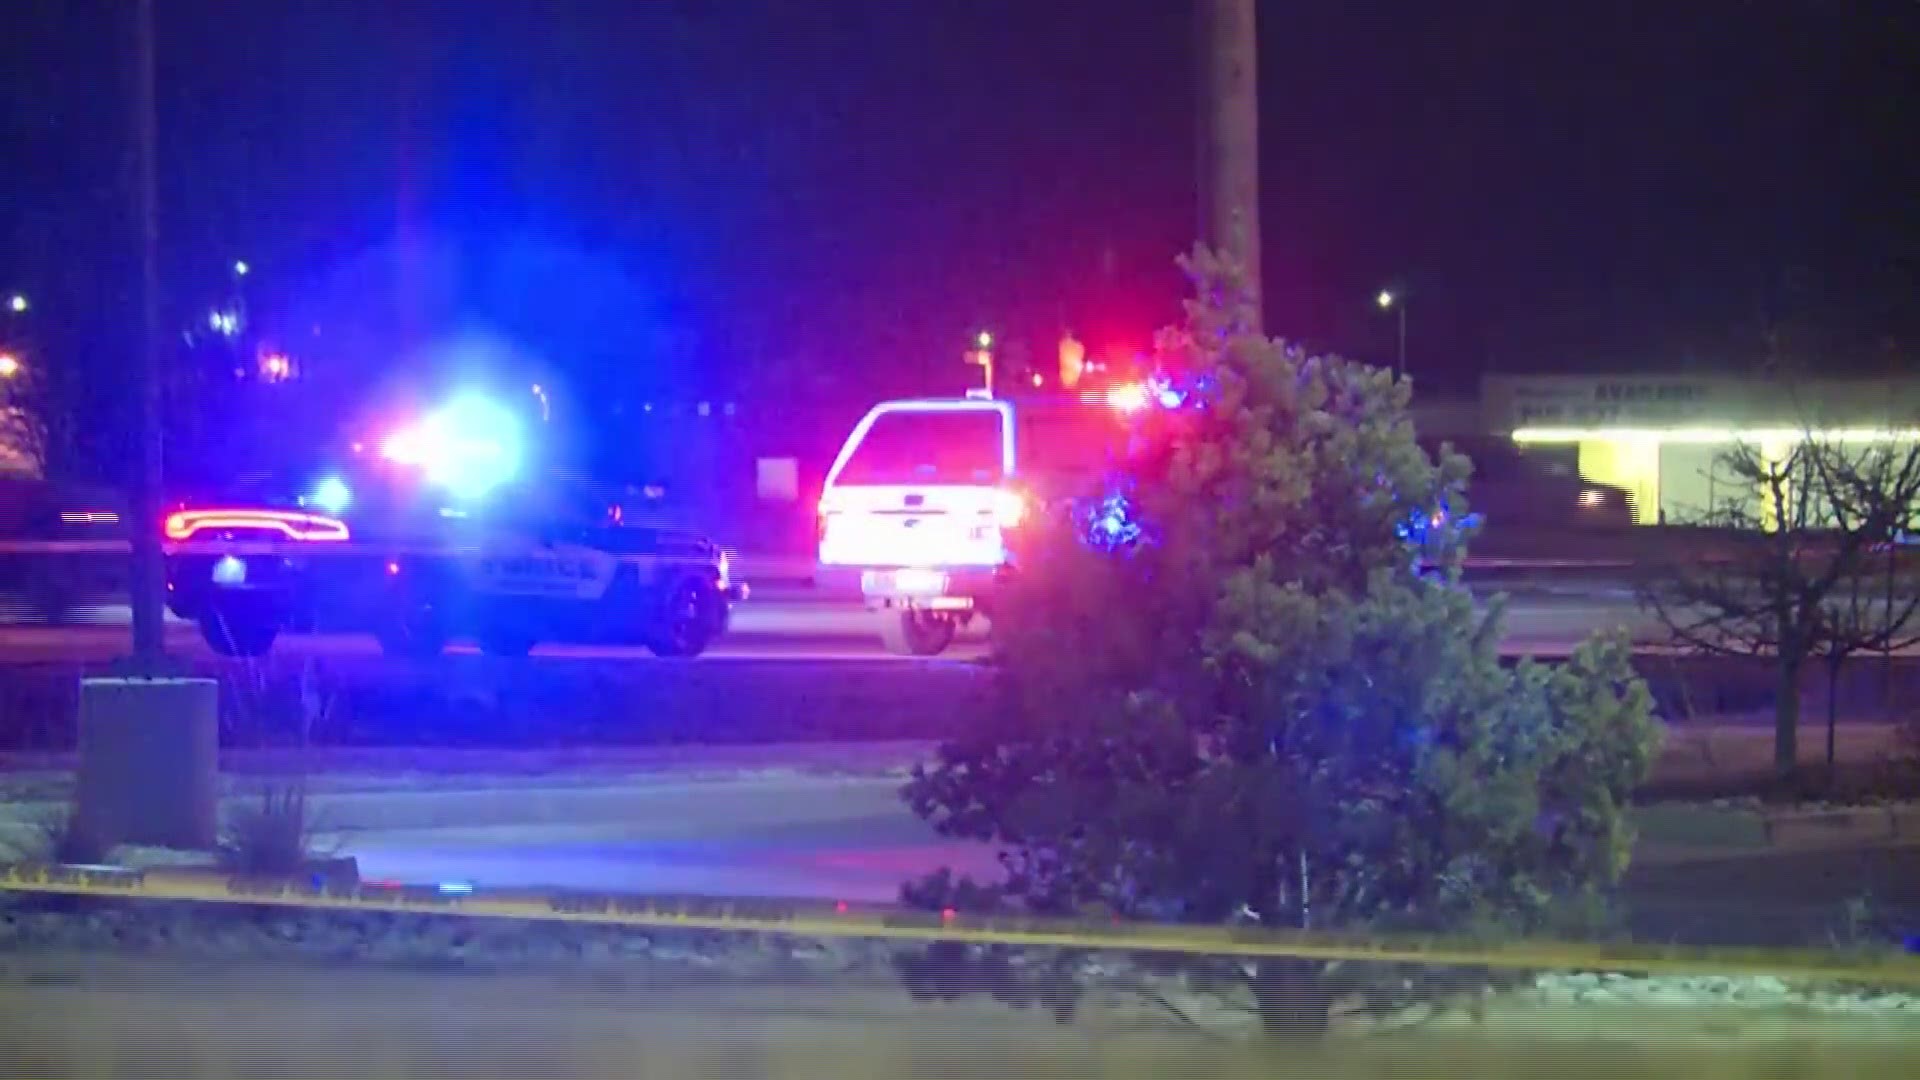 Scene video from an officer-involved shooting that resulted in one death in Colorado Springs early Thursday morning.